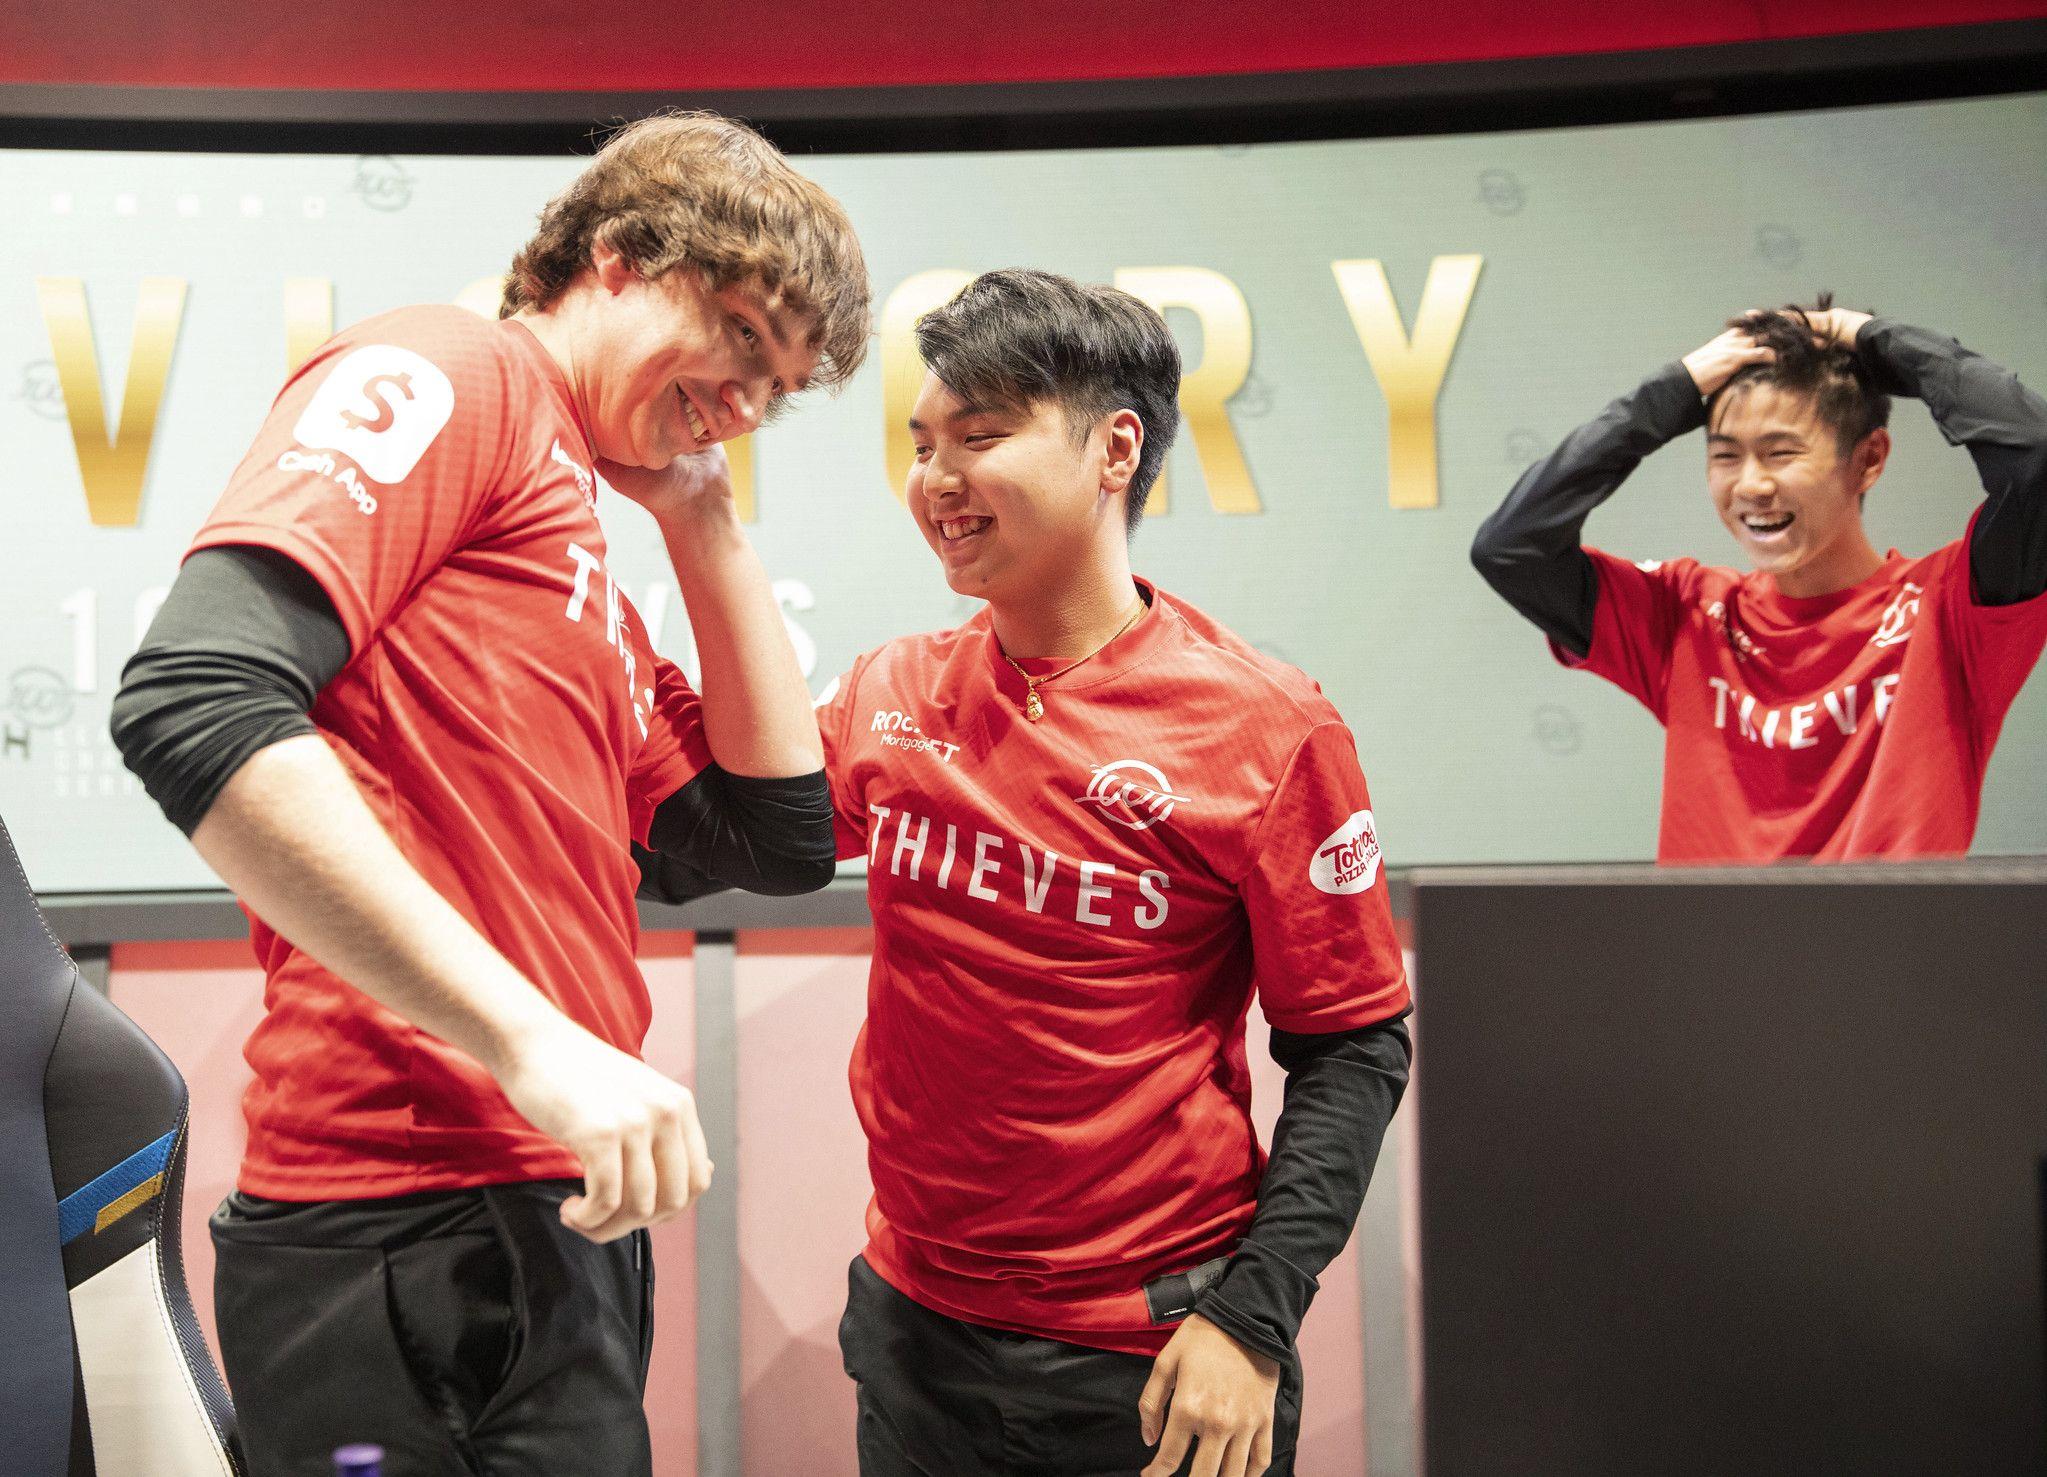 Meteos on stage with Ryoma and Stunt in LCS 2020